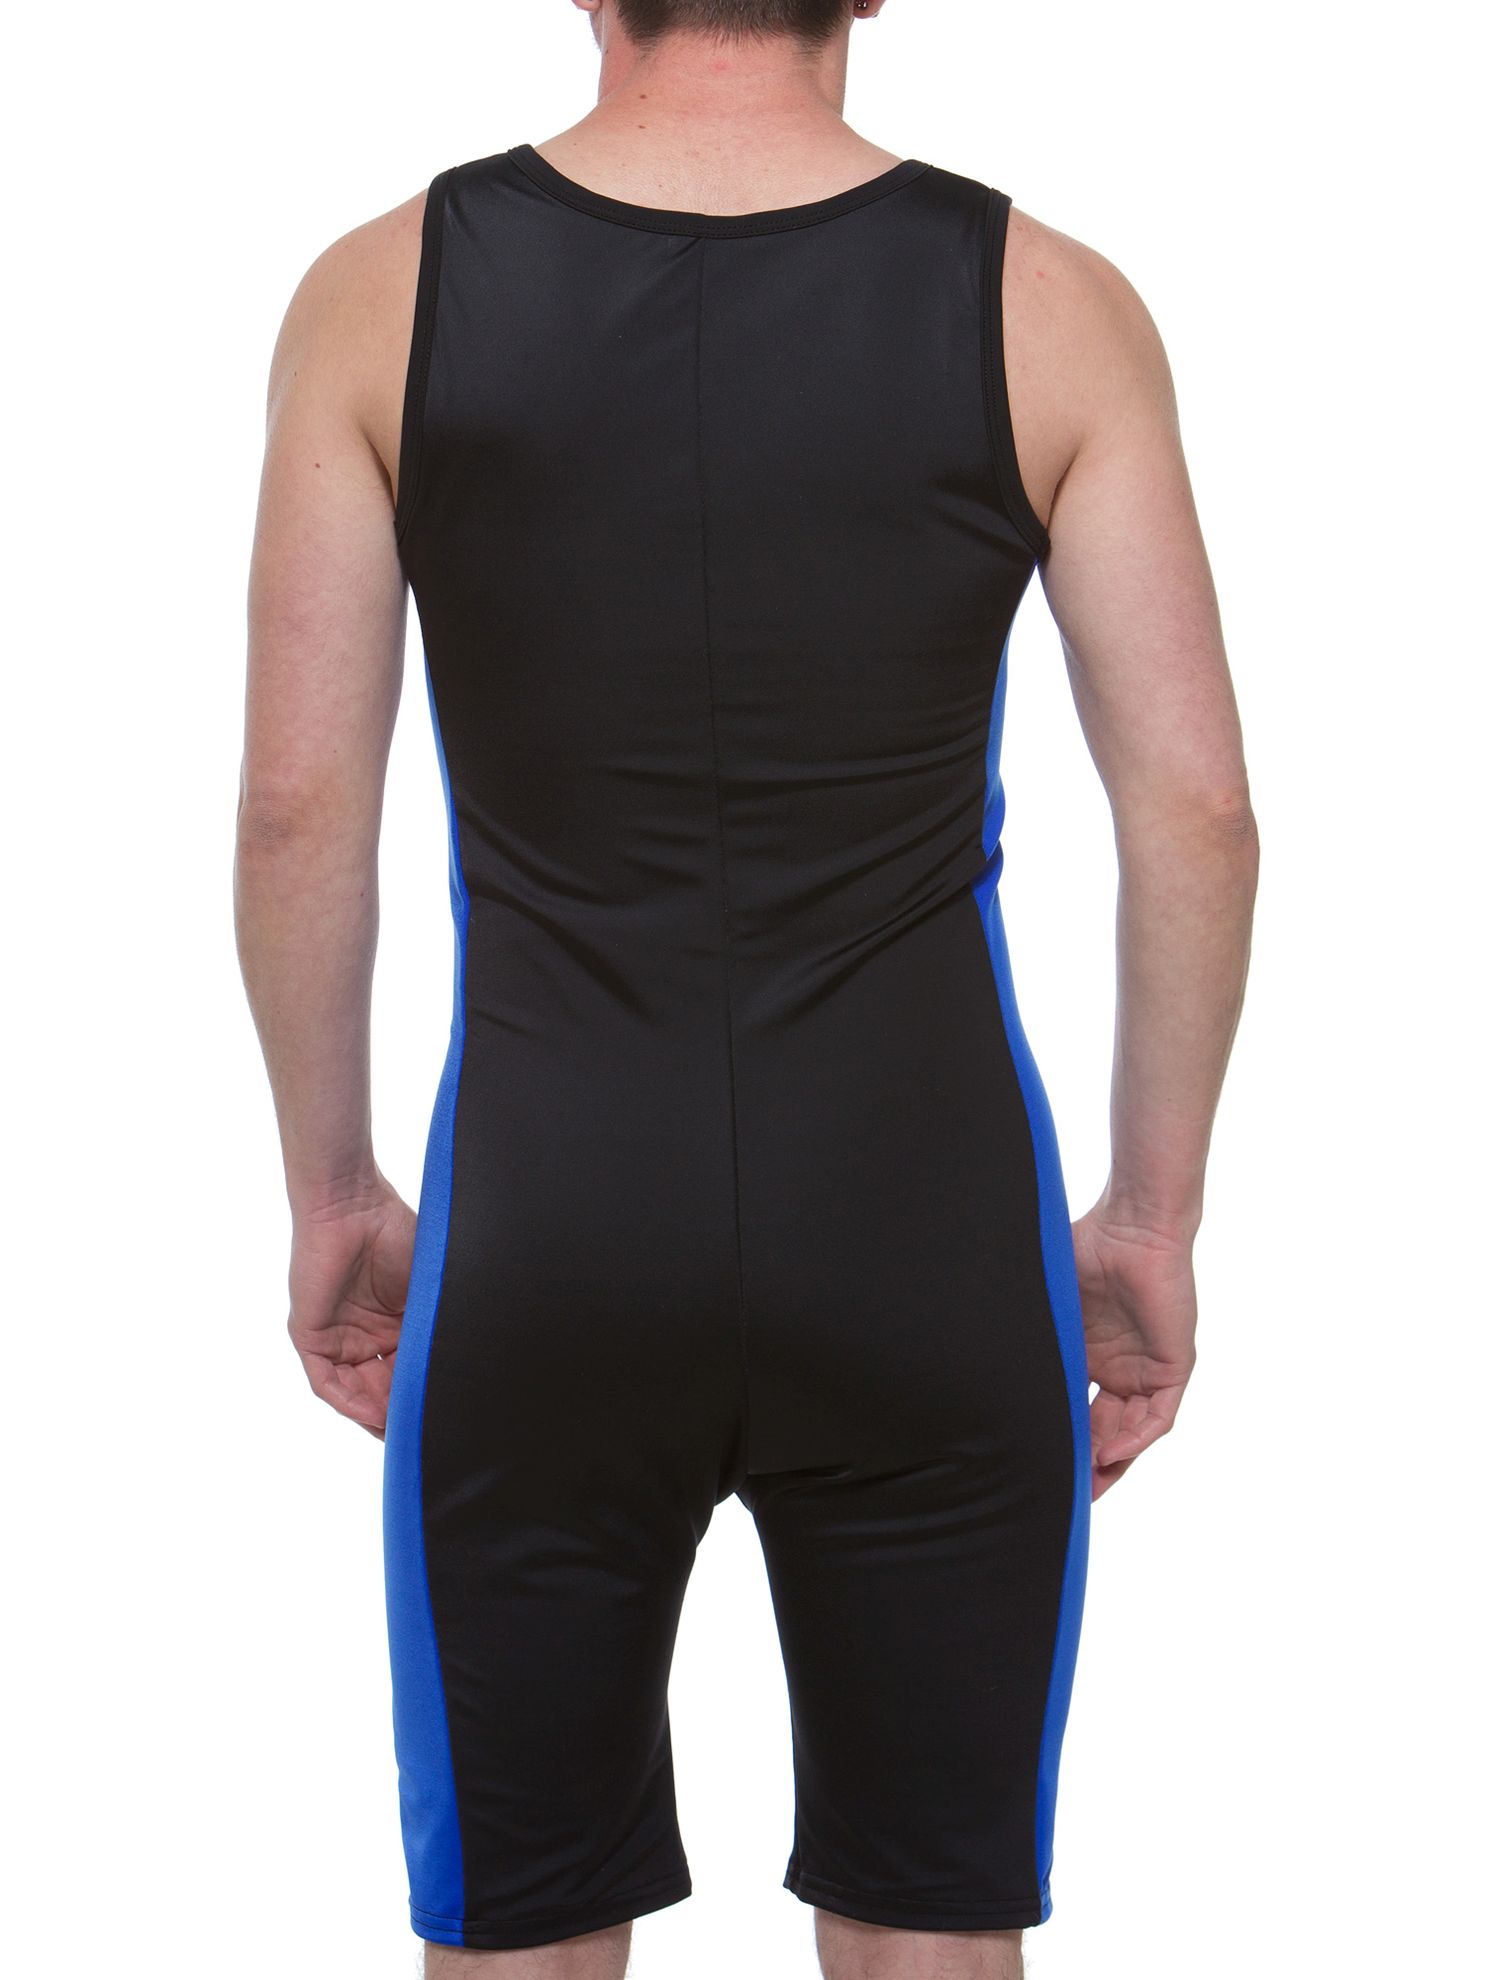 Concealer Compression Swimsuit. FTM Chest Binders for Trans Men by ...